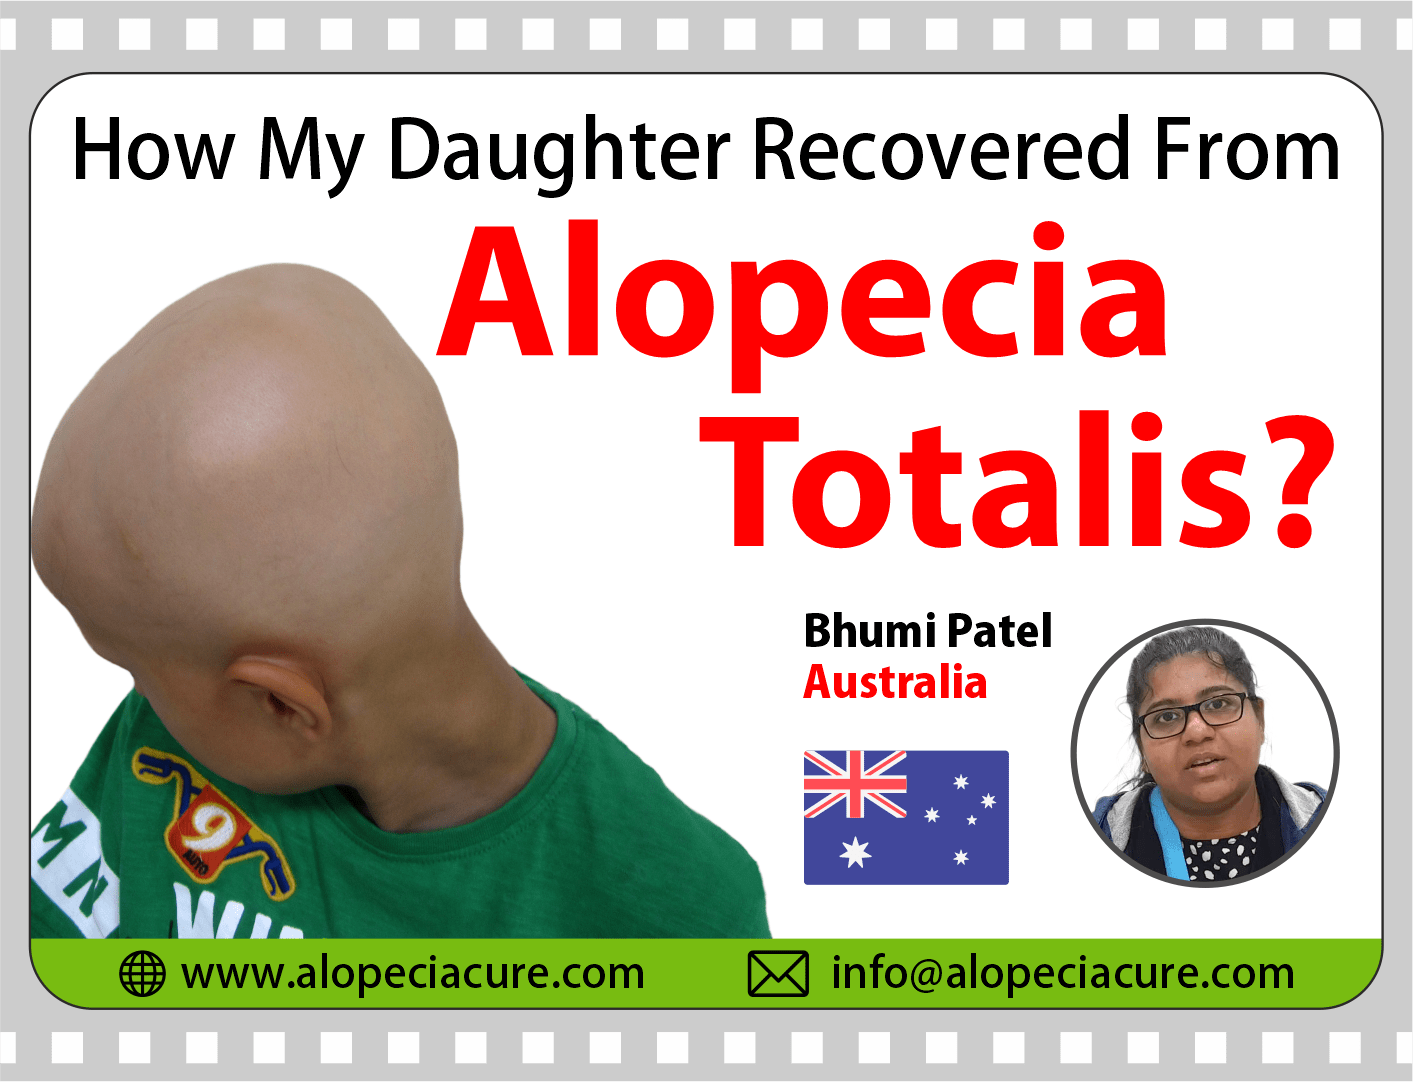 Australia patient review for Dr. Rohit's natural treatment for alopecia totalis